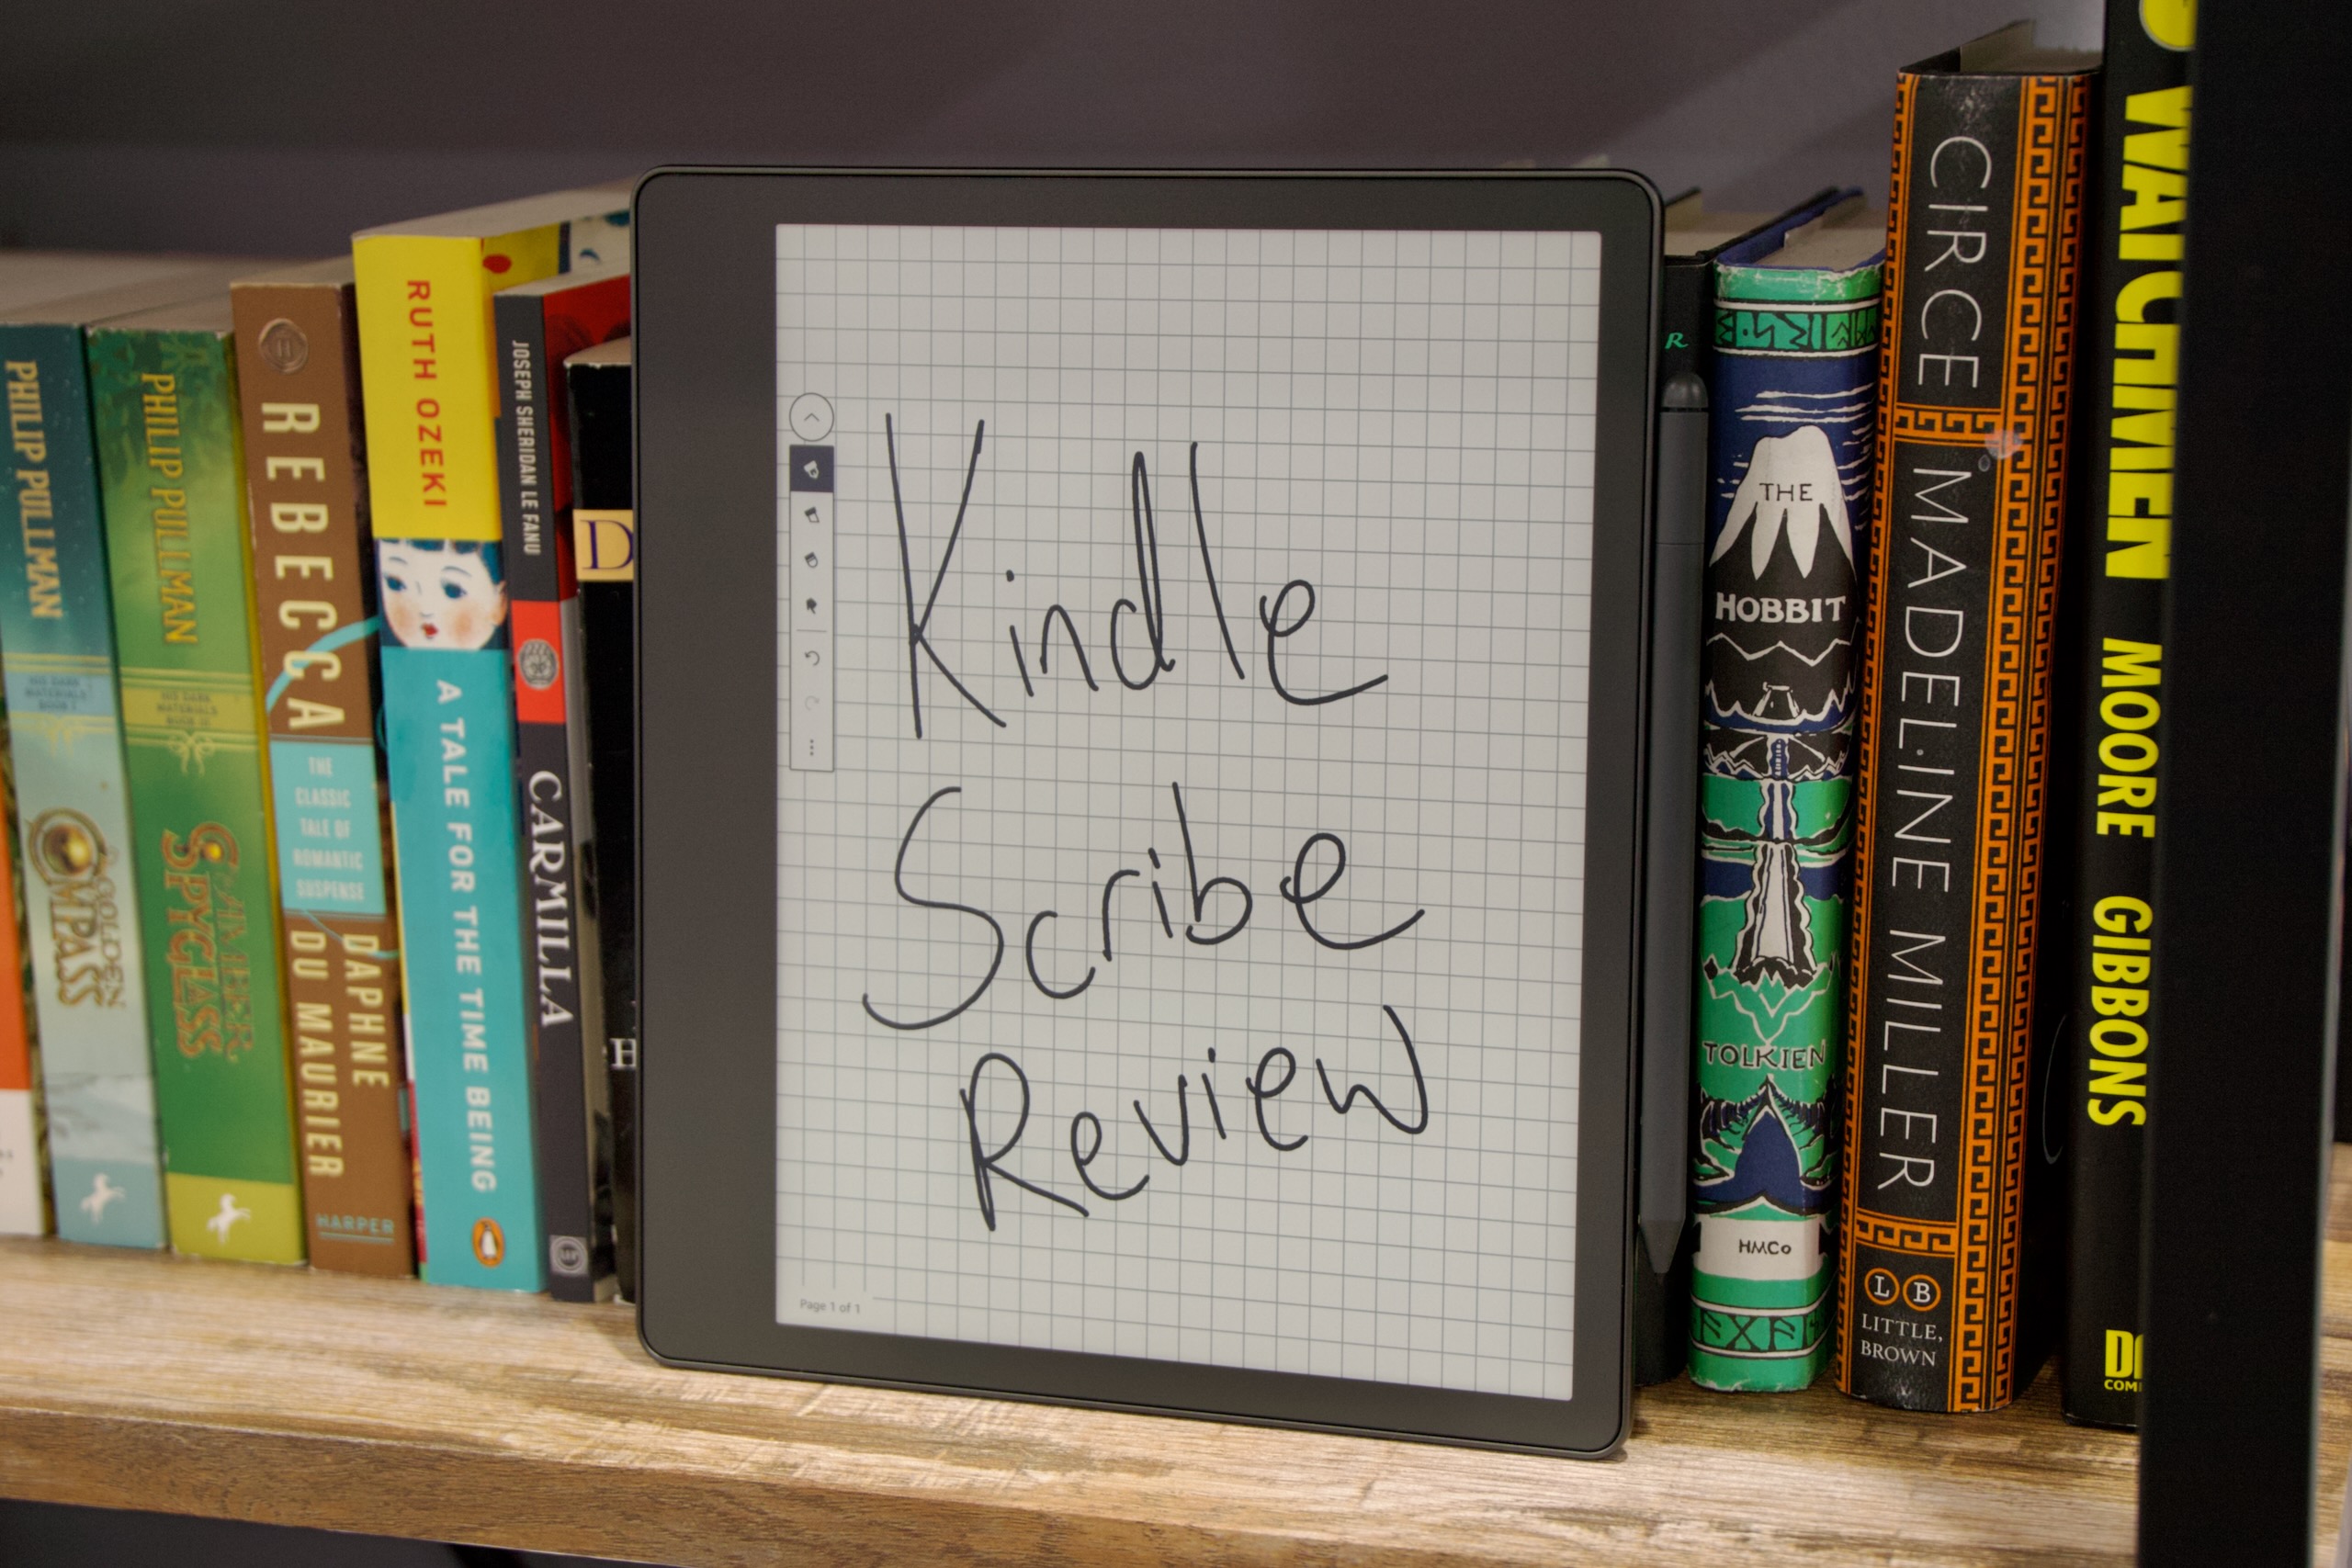 Kindle Scribe - First Kindle for Reading and Writing